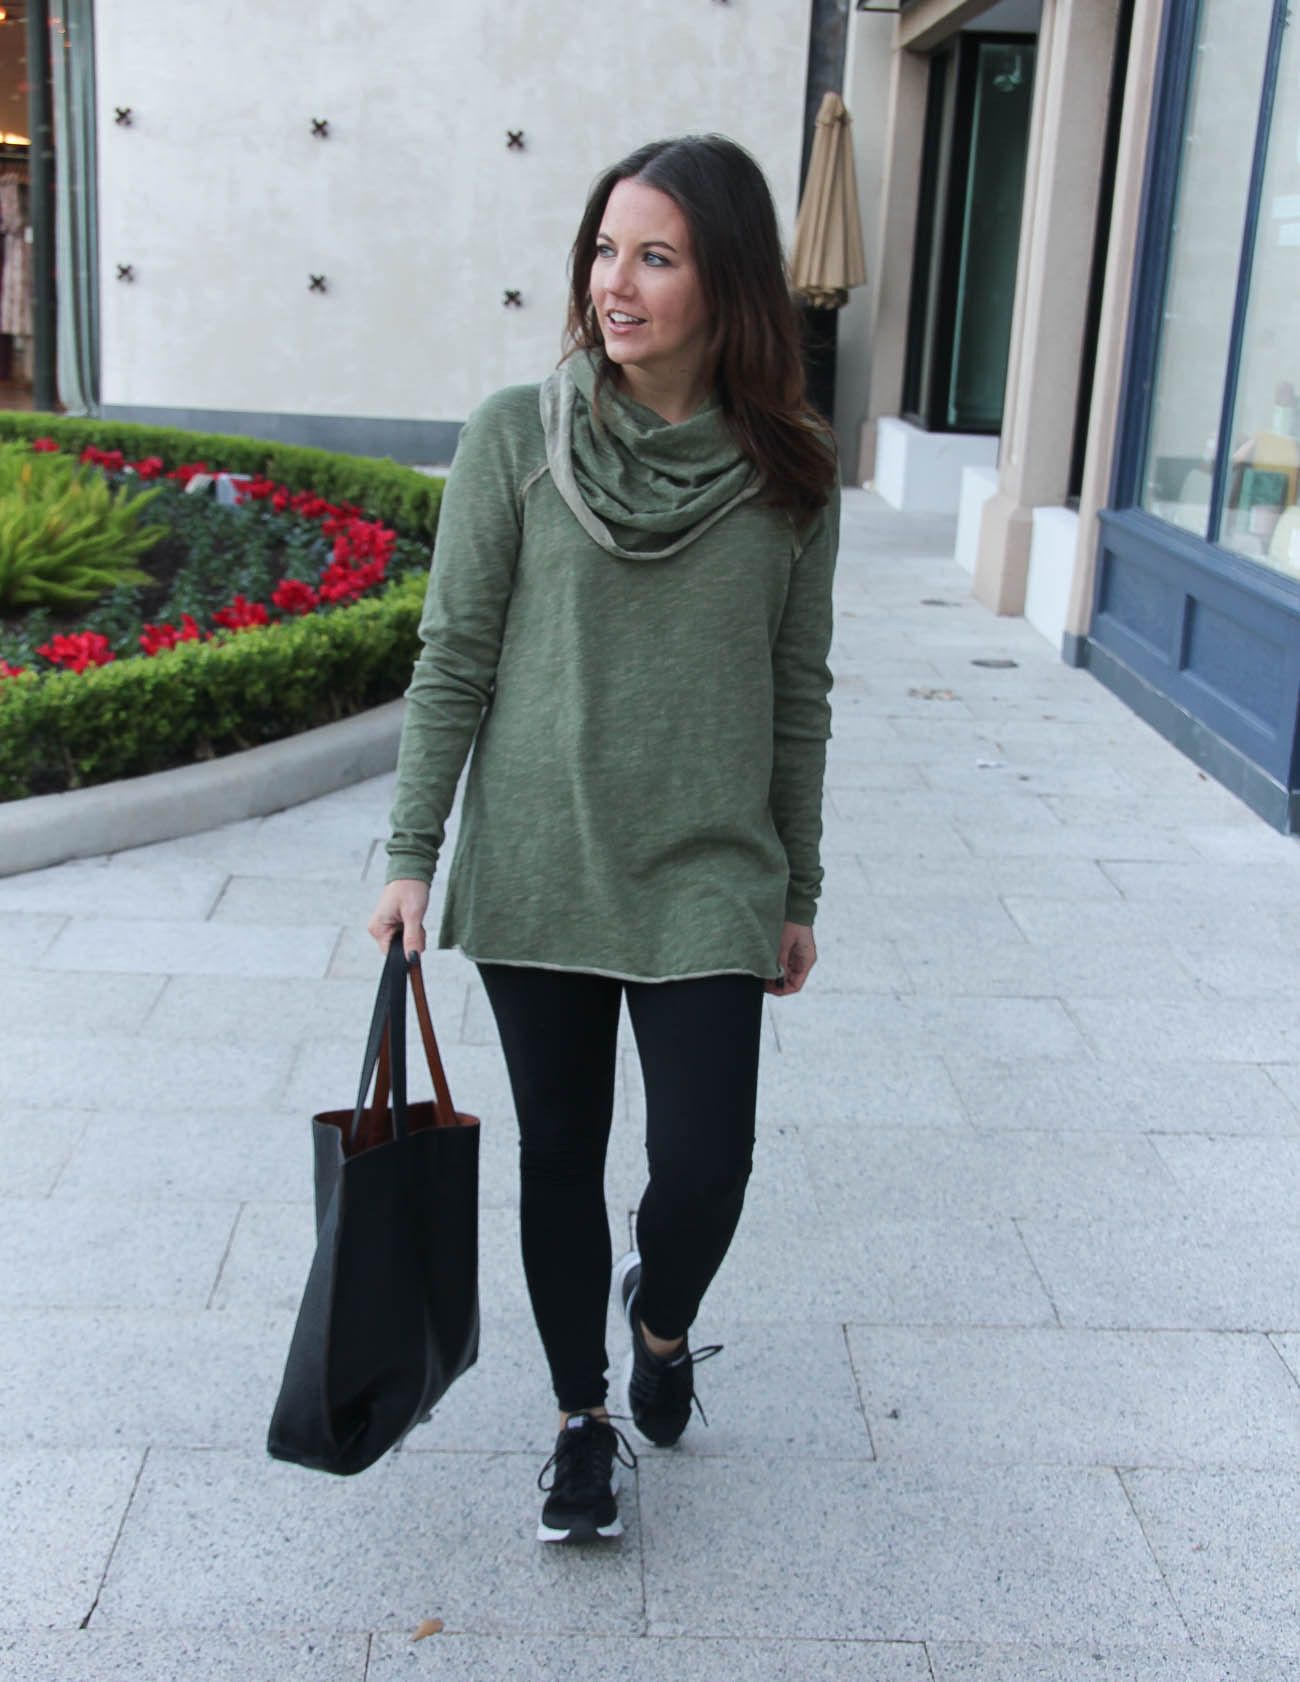 Dark Green Shawl Cardigan with Black Leggings Outfits (1 ideas & outfits)